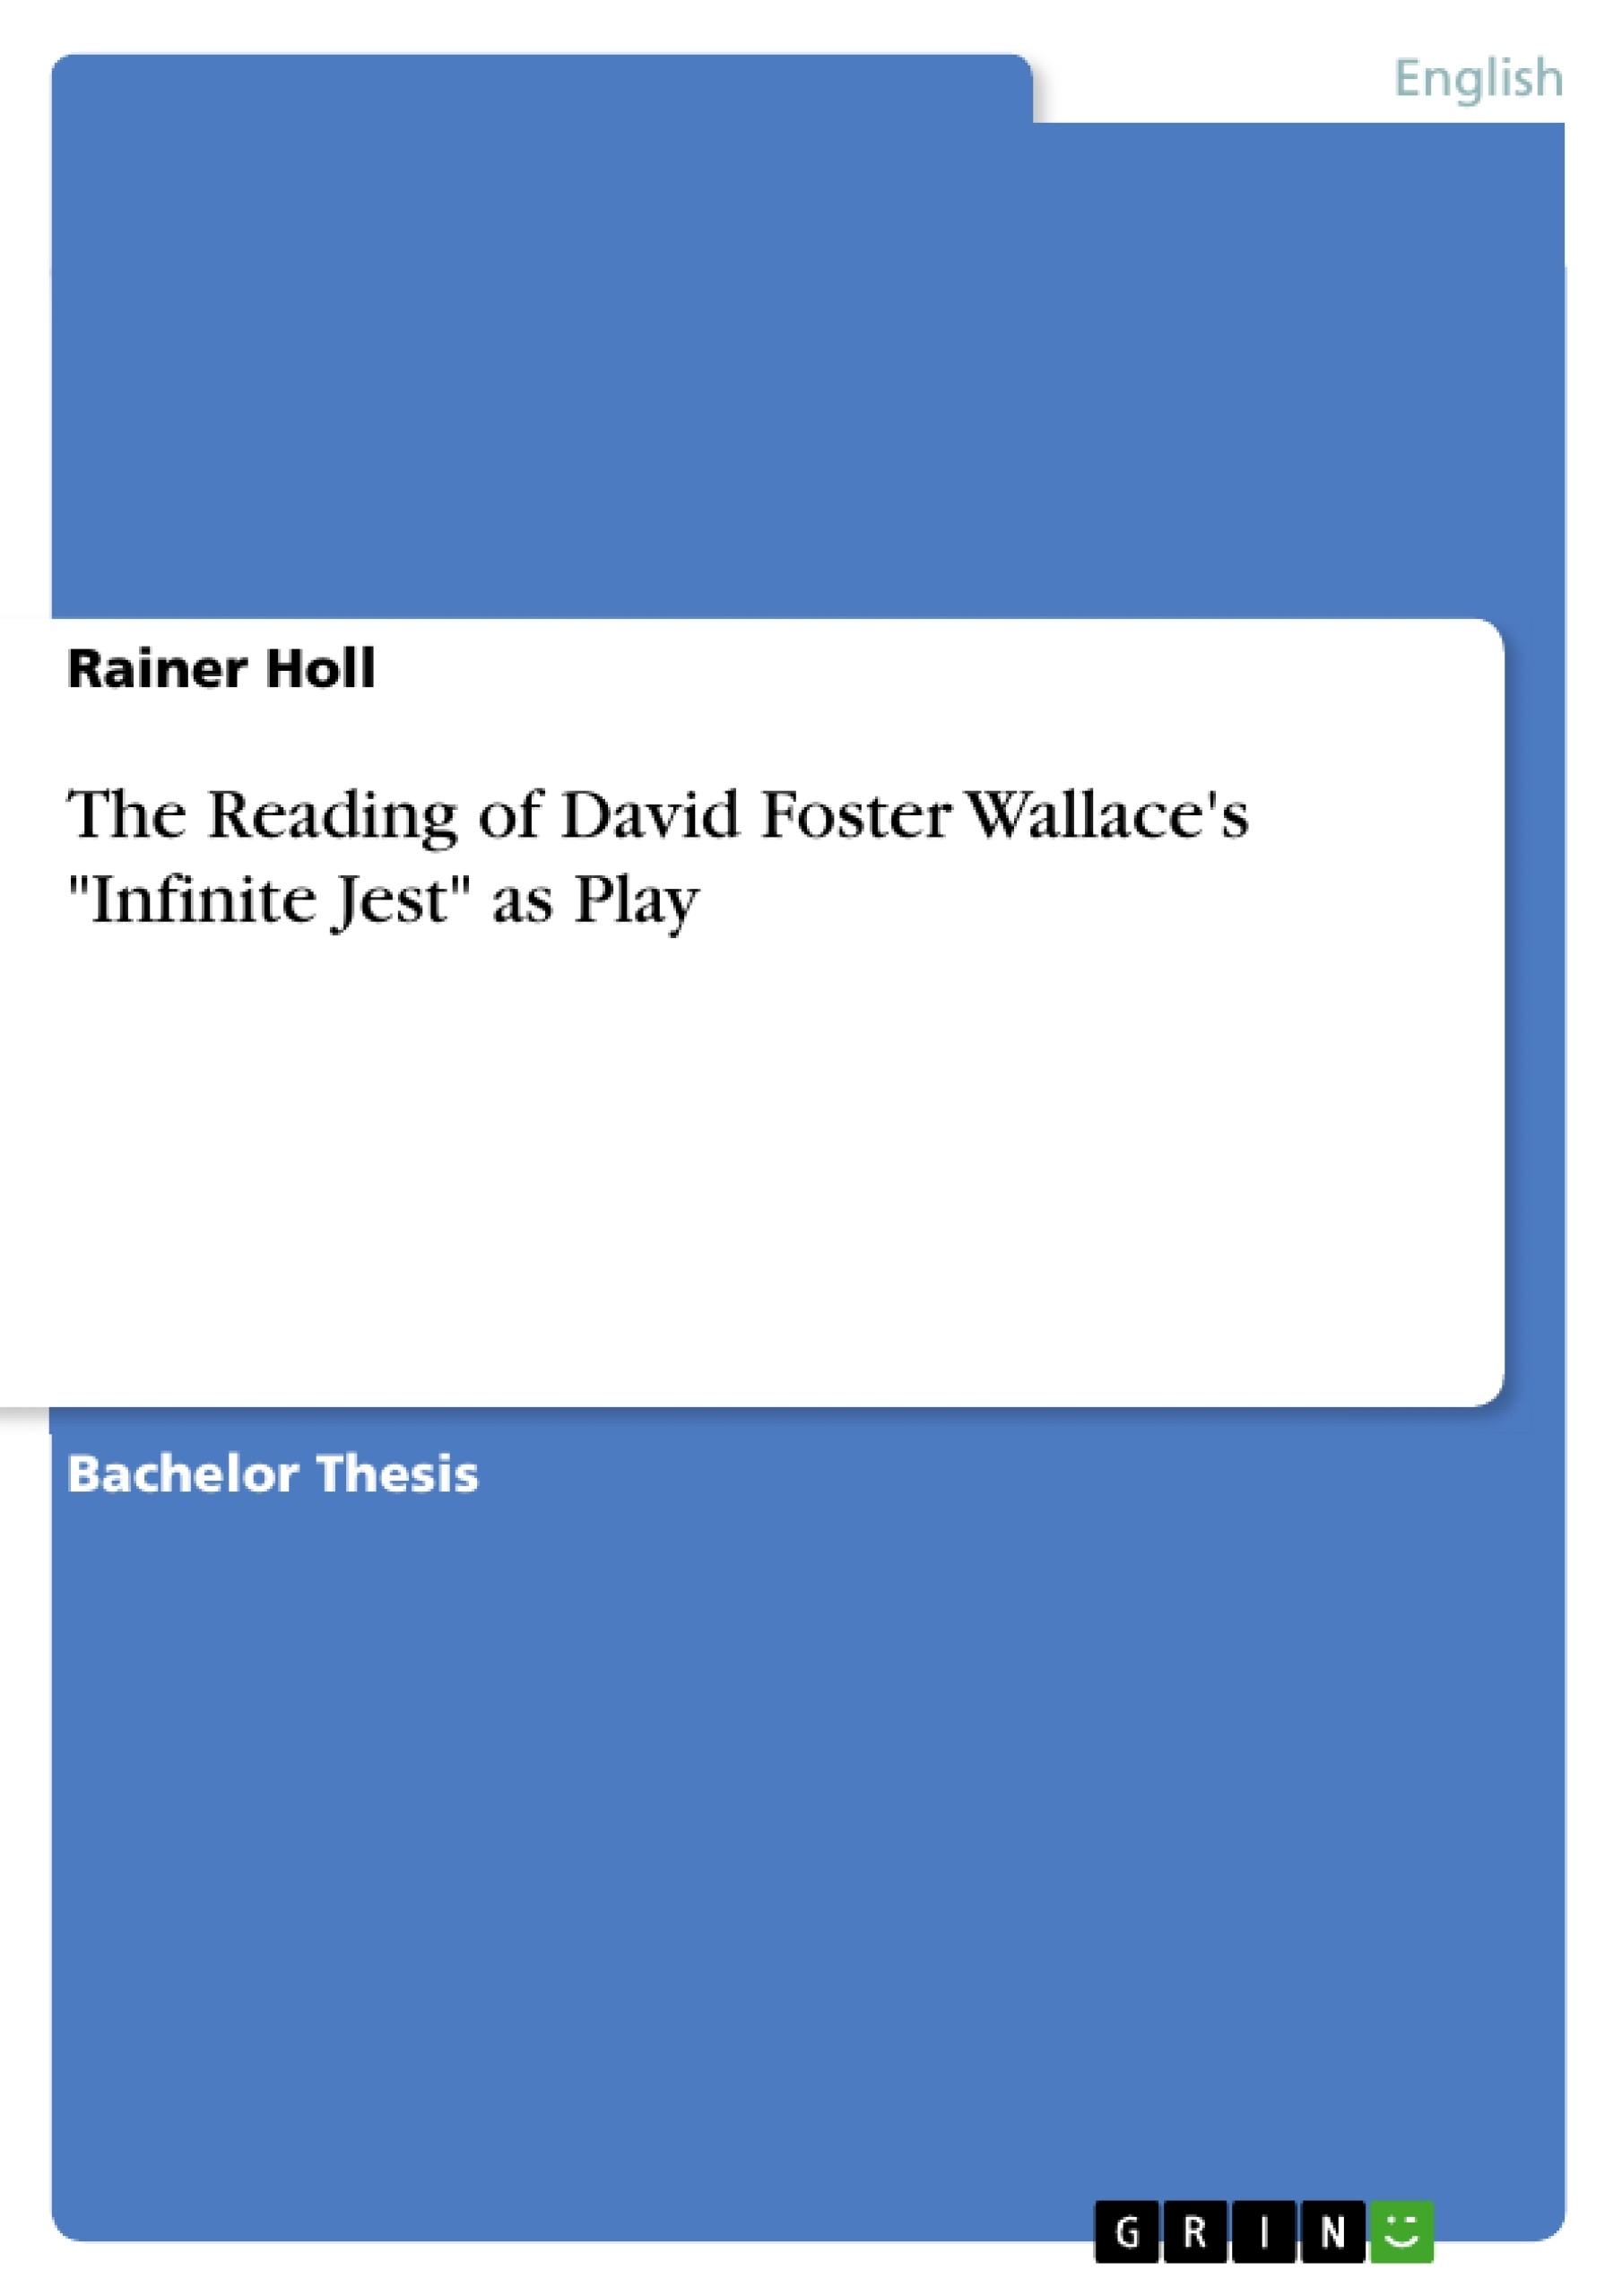 Titre: The Reading of David Foster Wallace's "Infinite Jest" as Play